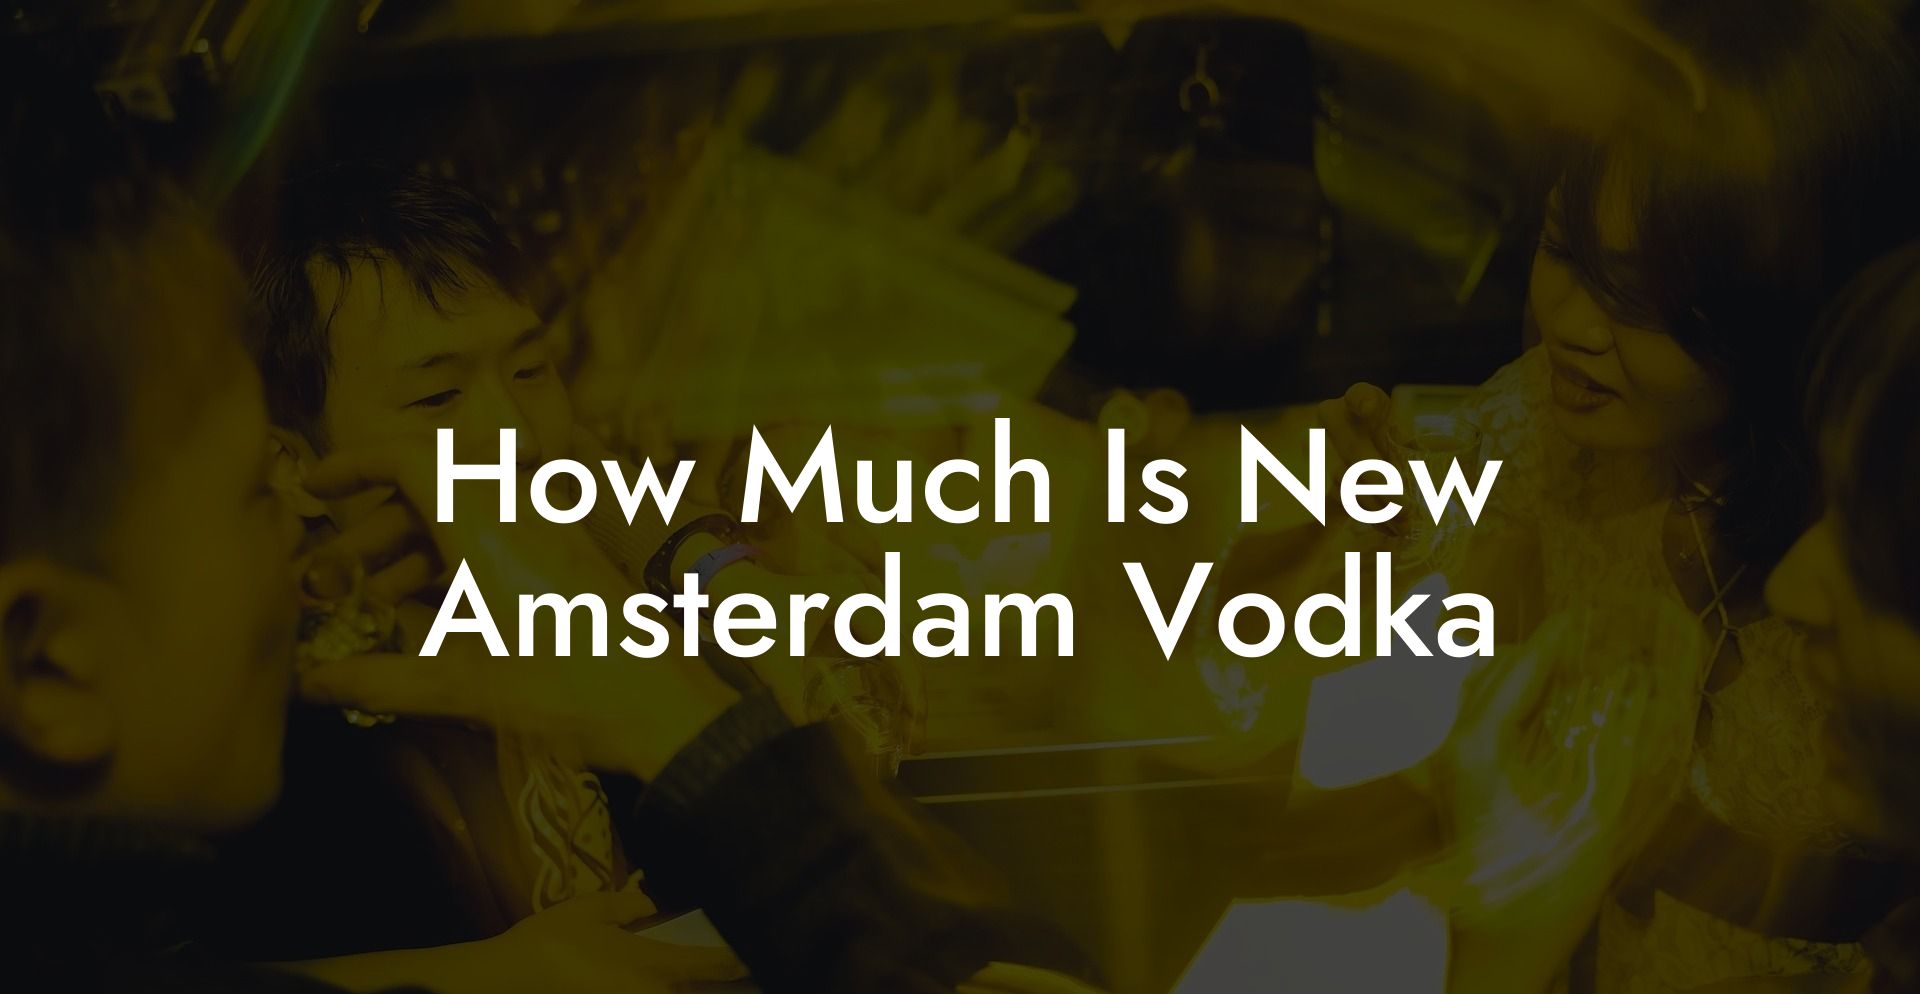 How Much Is New Amsterdam Vodka